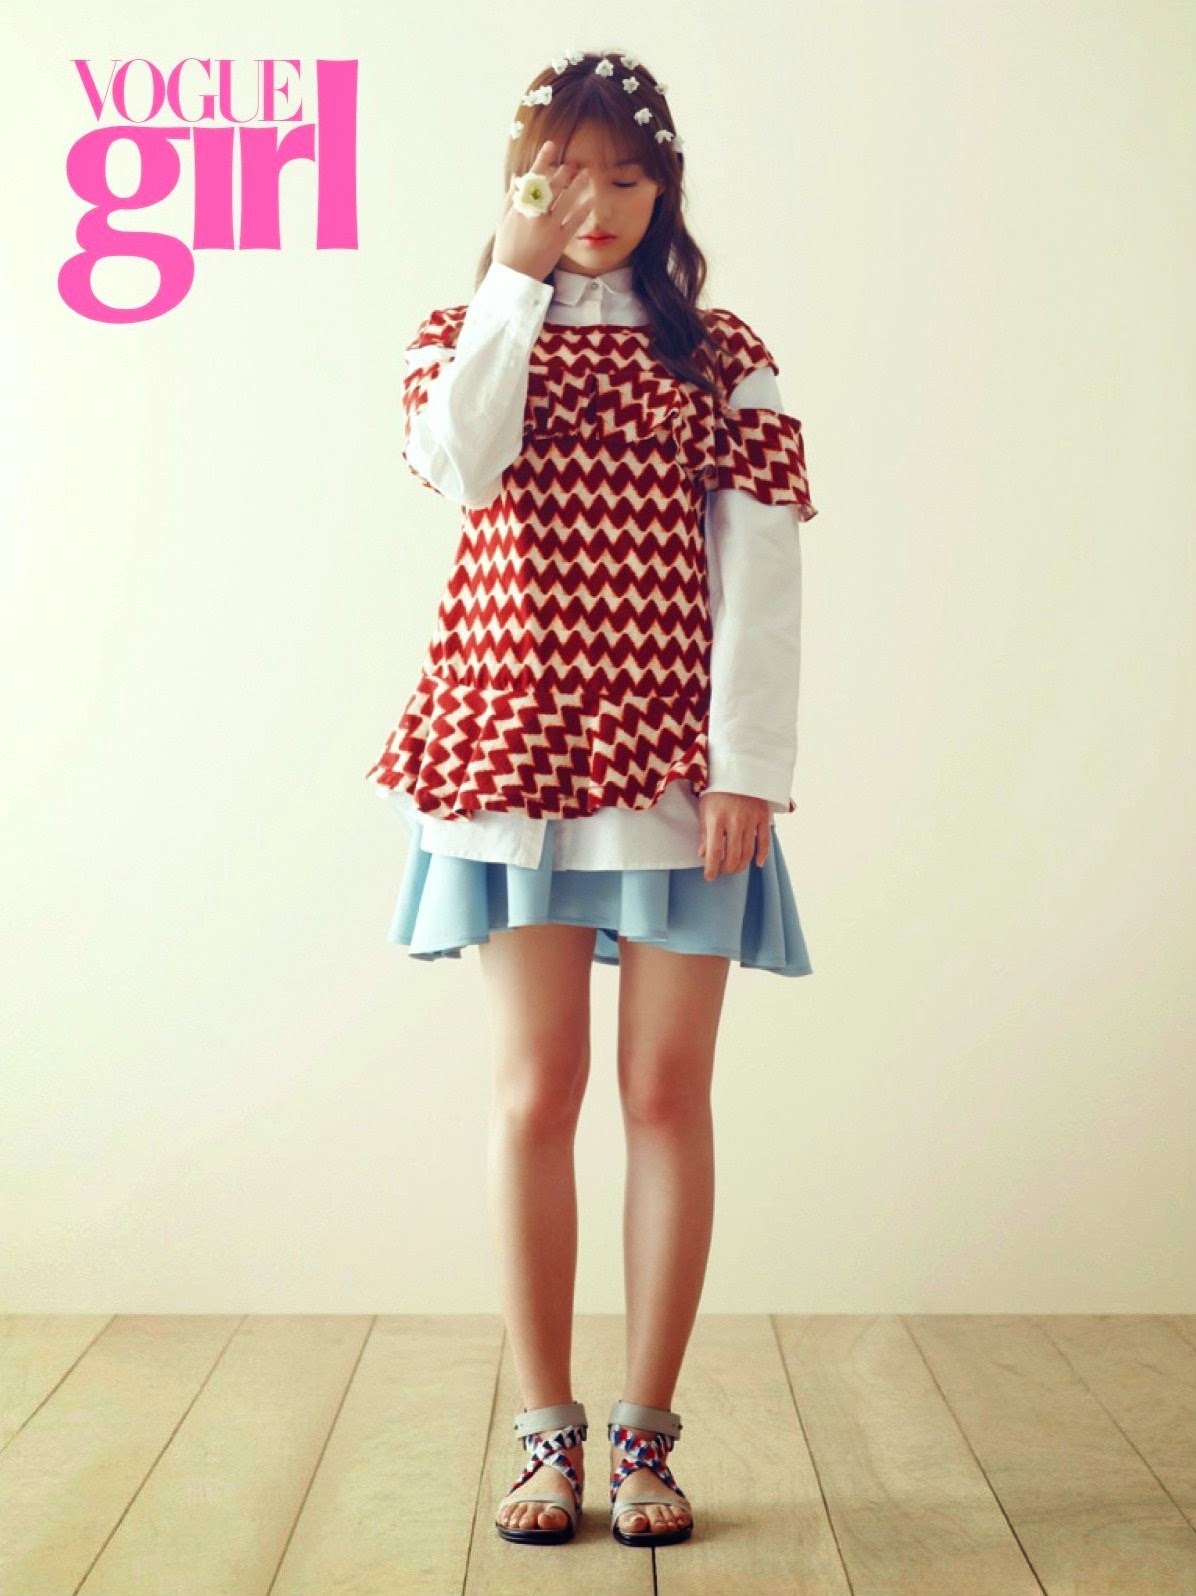 Kim Ji Won for Sure, Vogue Girl and 1st Look - POPdramatic